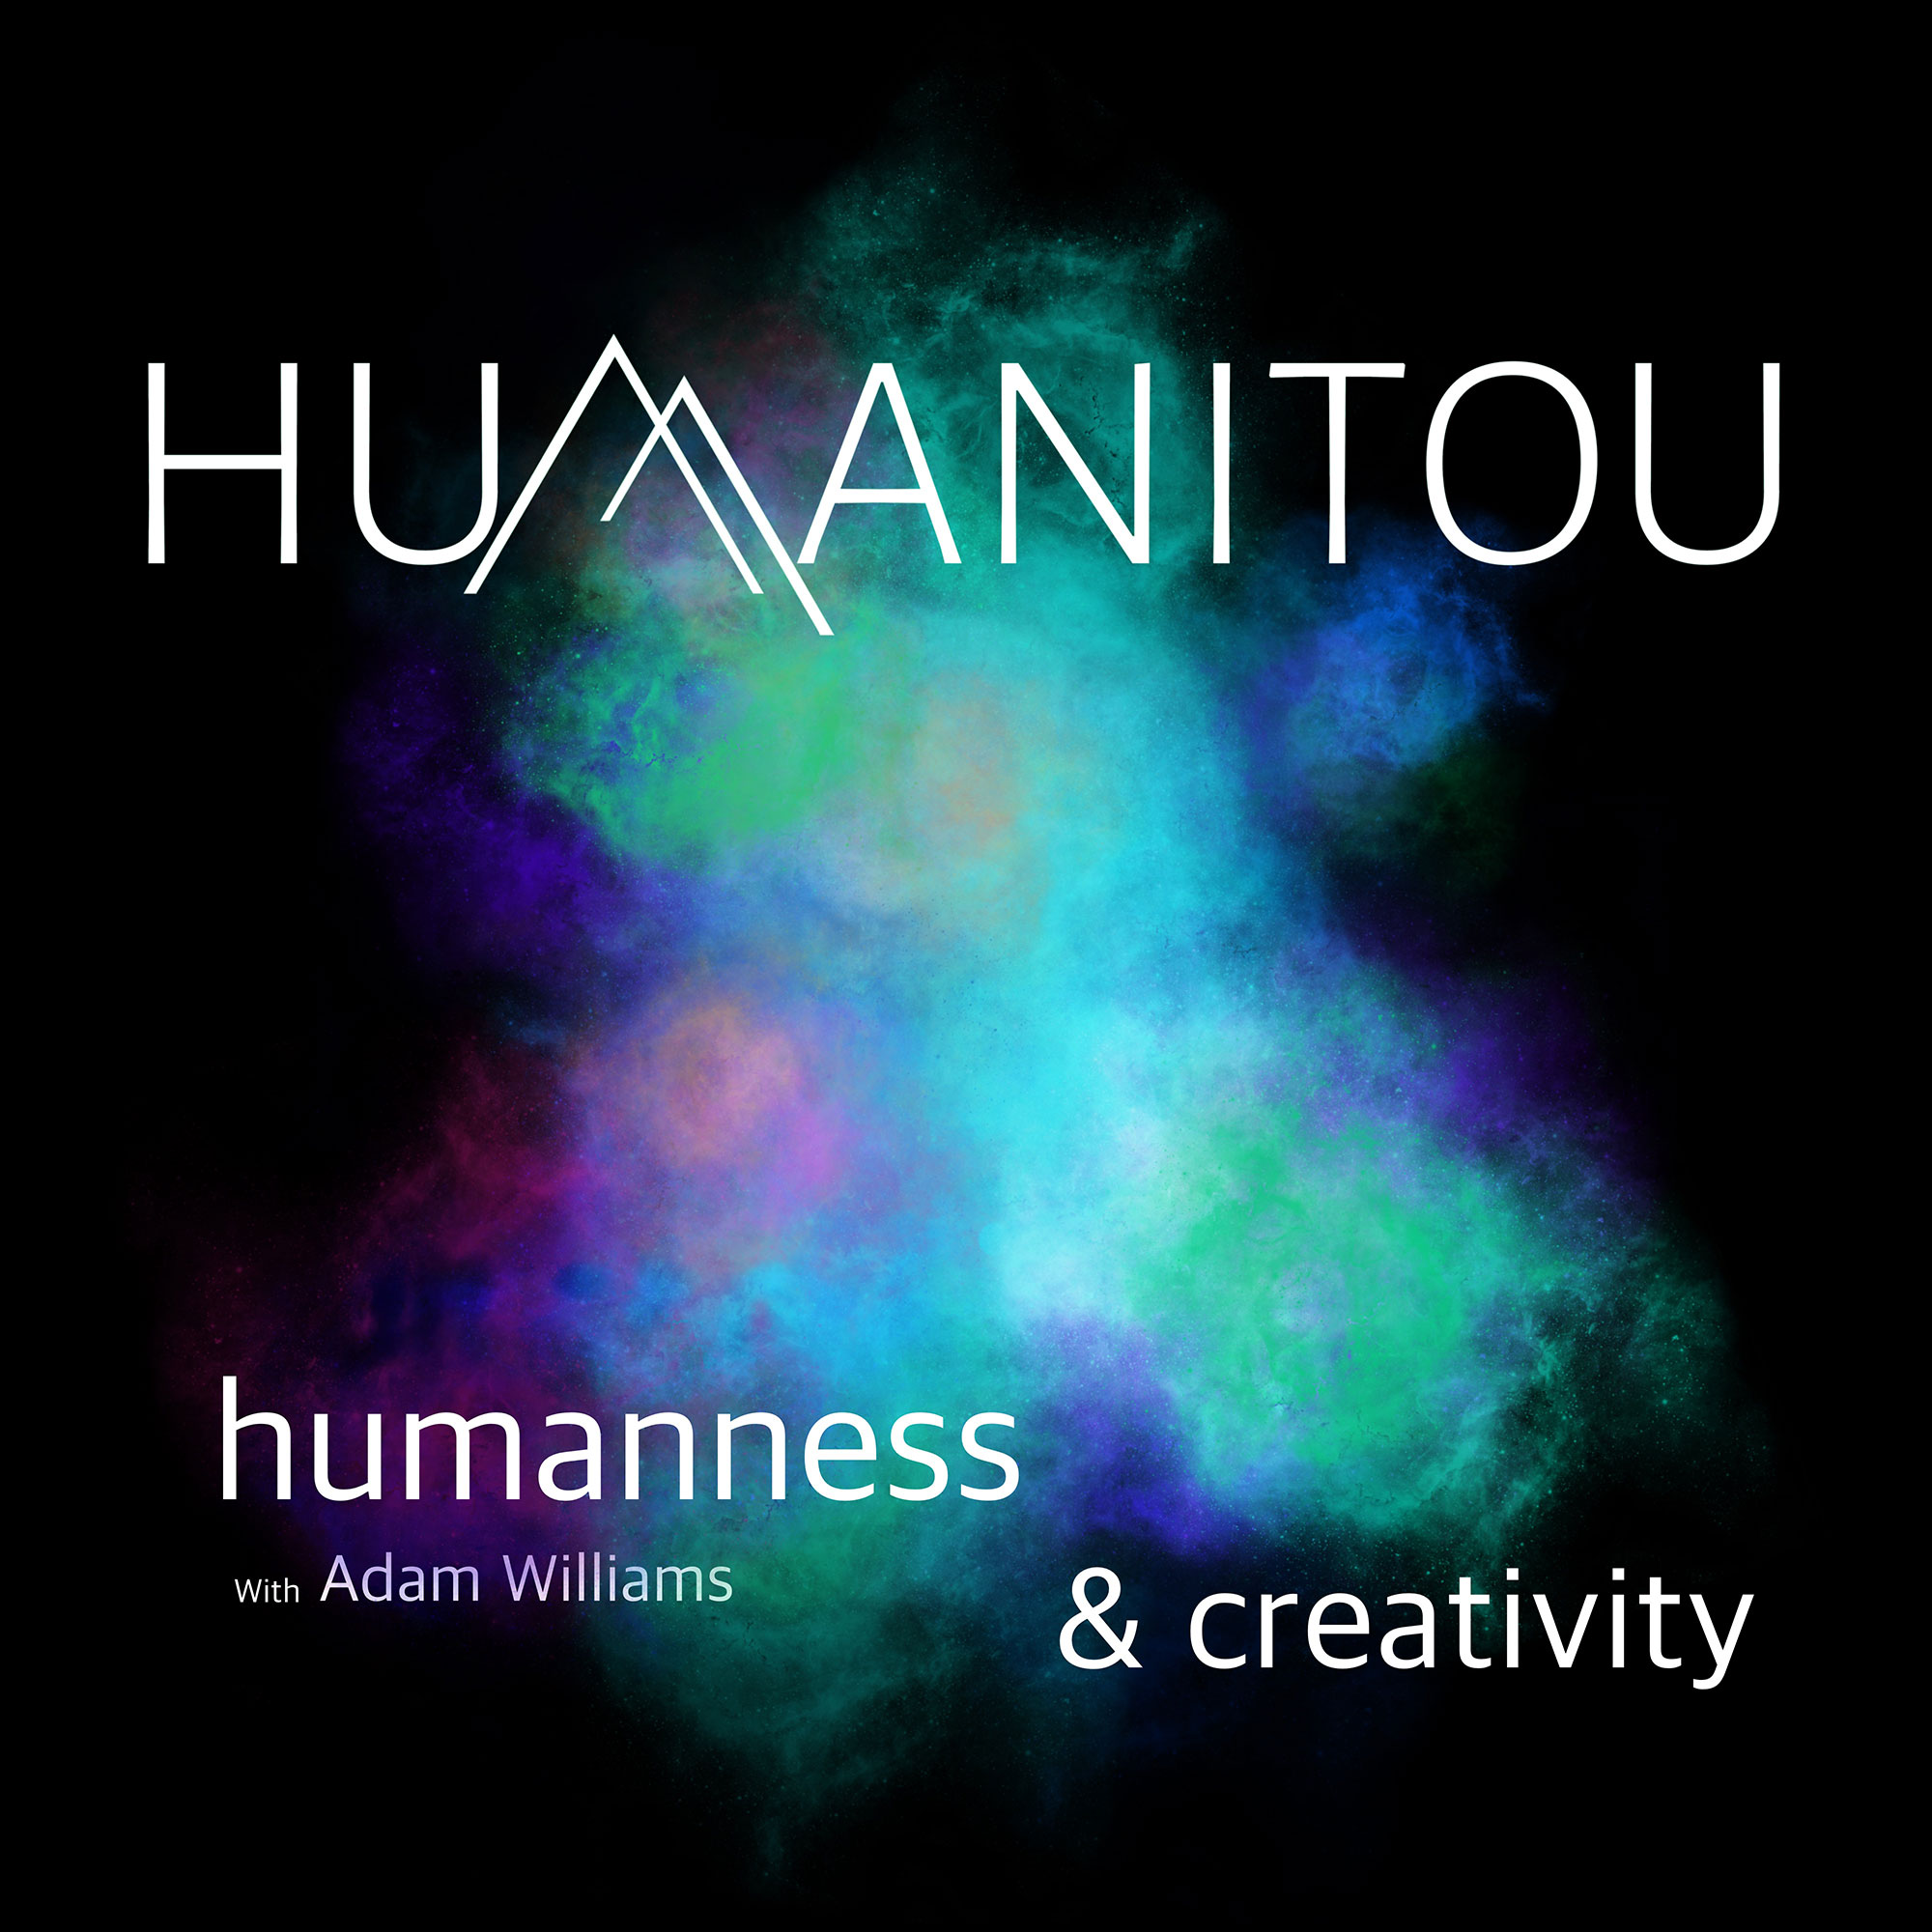 Humanitou Is Dead, Long Live Humanitou